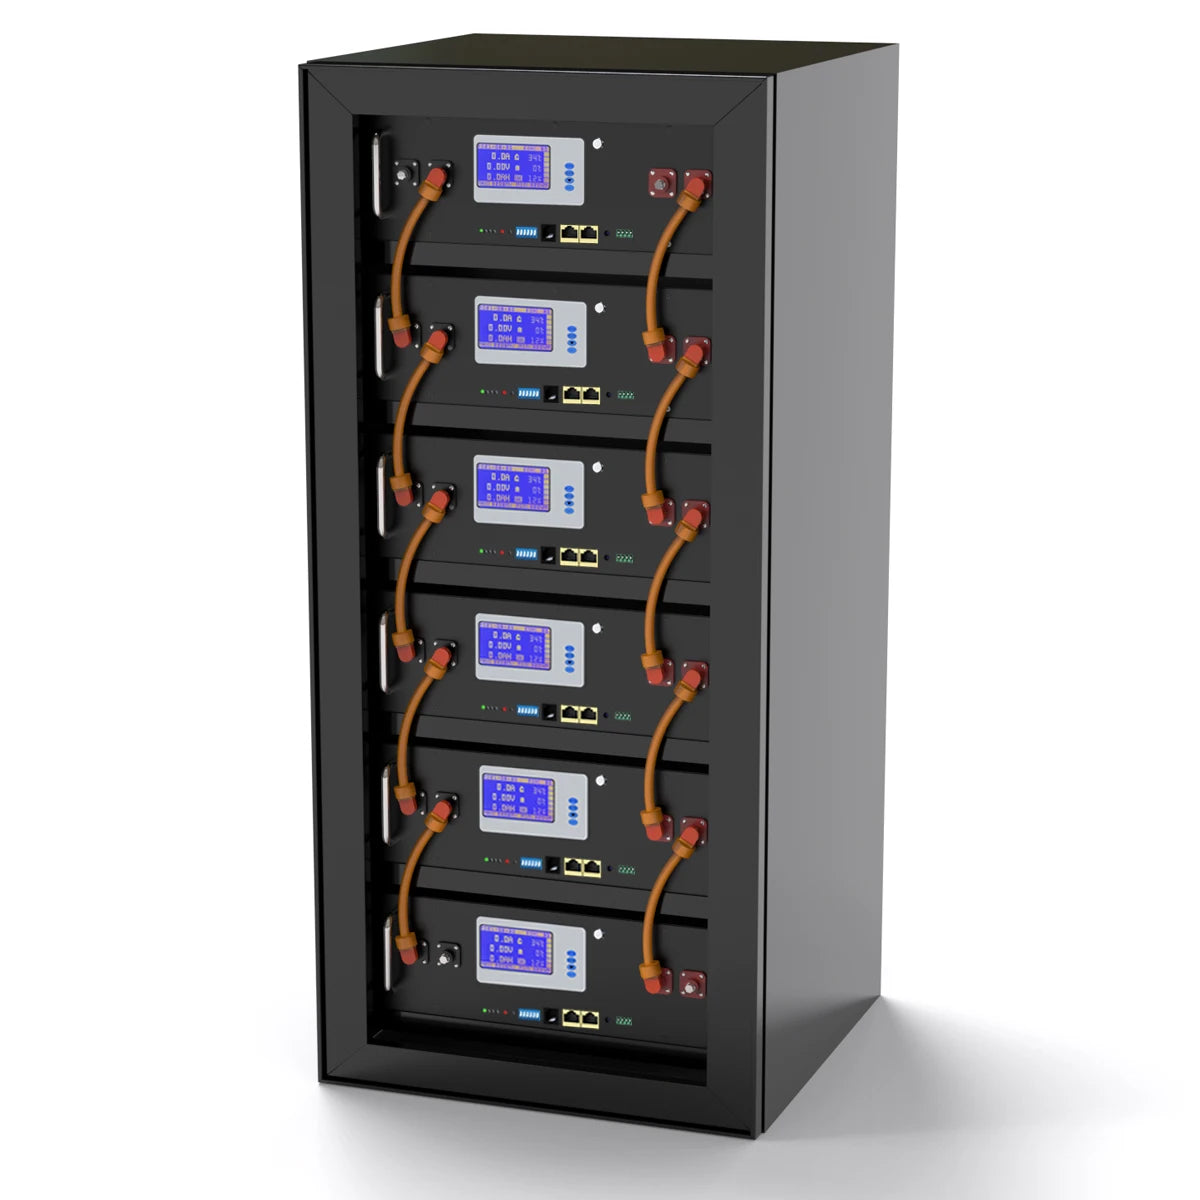 LiFePO4 48V 5KW Battery, 48V LiFePO4 Battery Pack: 100Ah, 5kW, intelligent BMS, compatible with various inverters and computers.